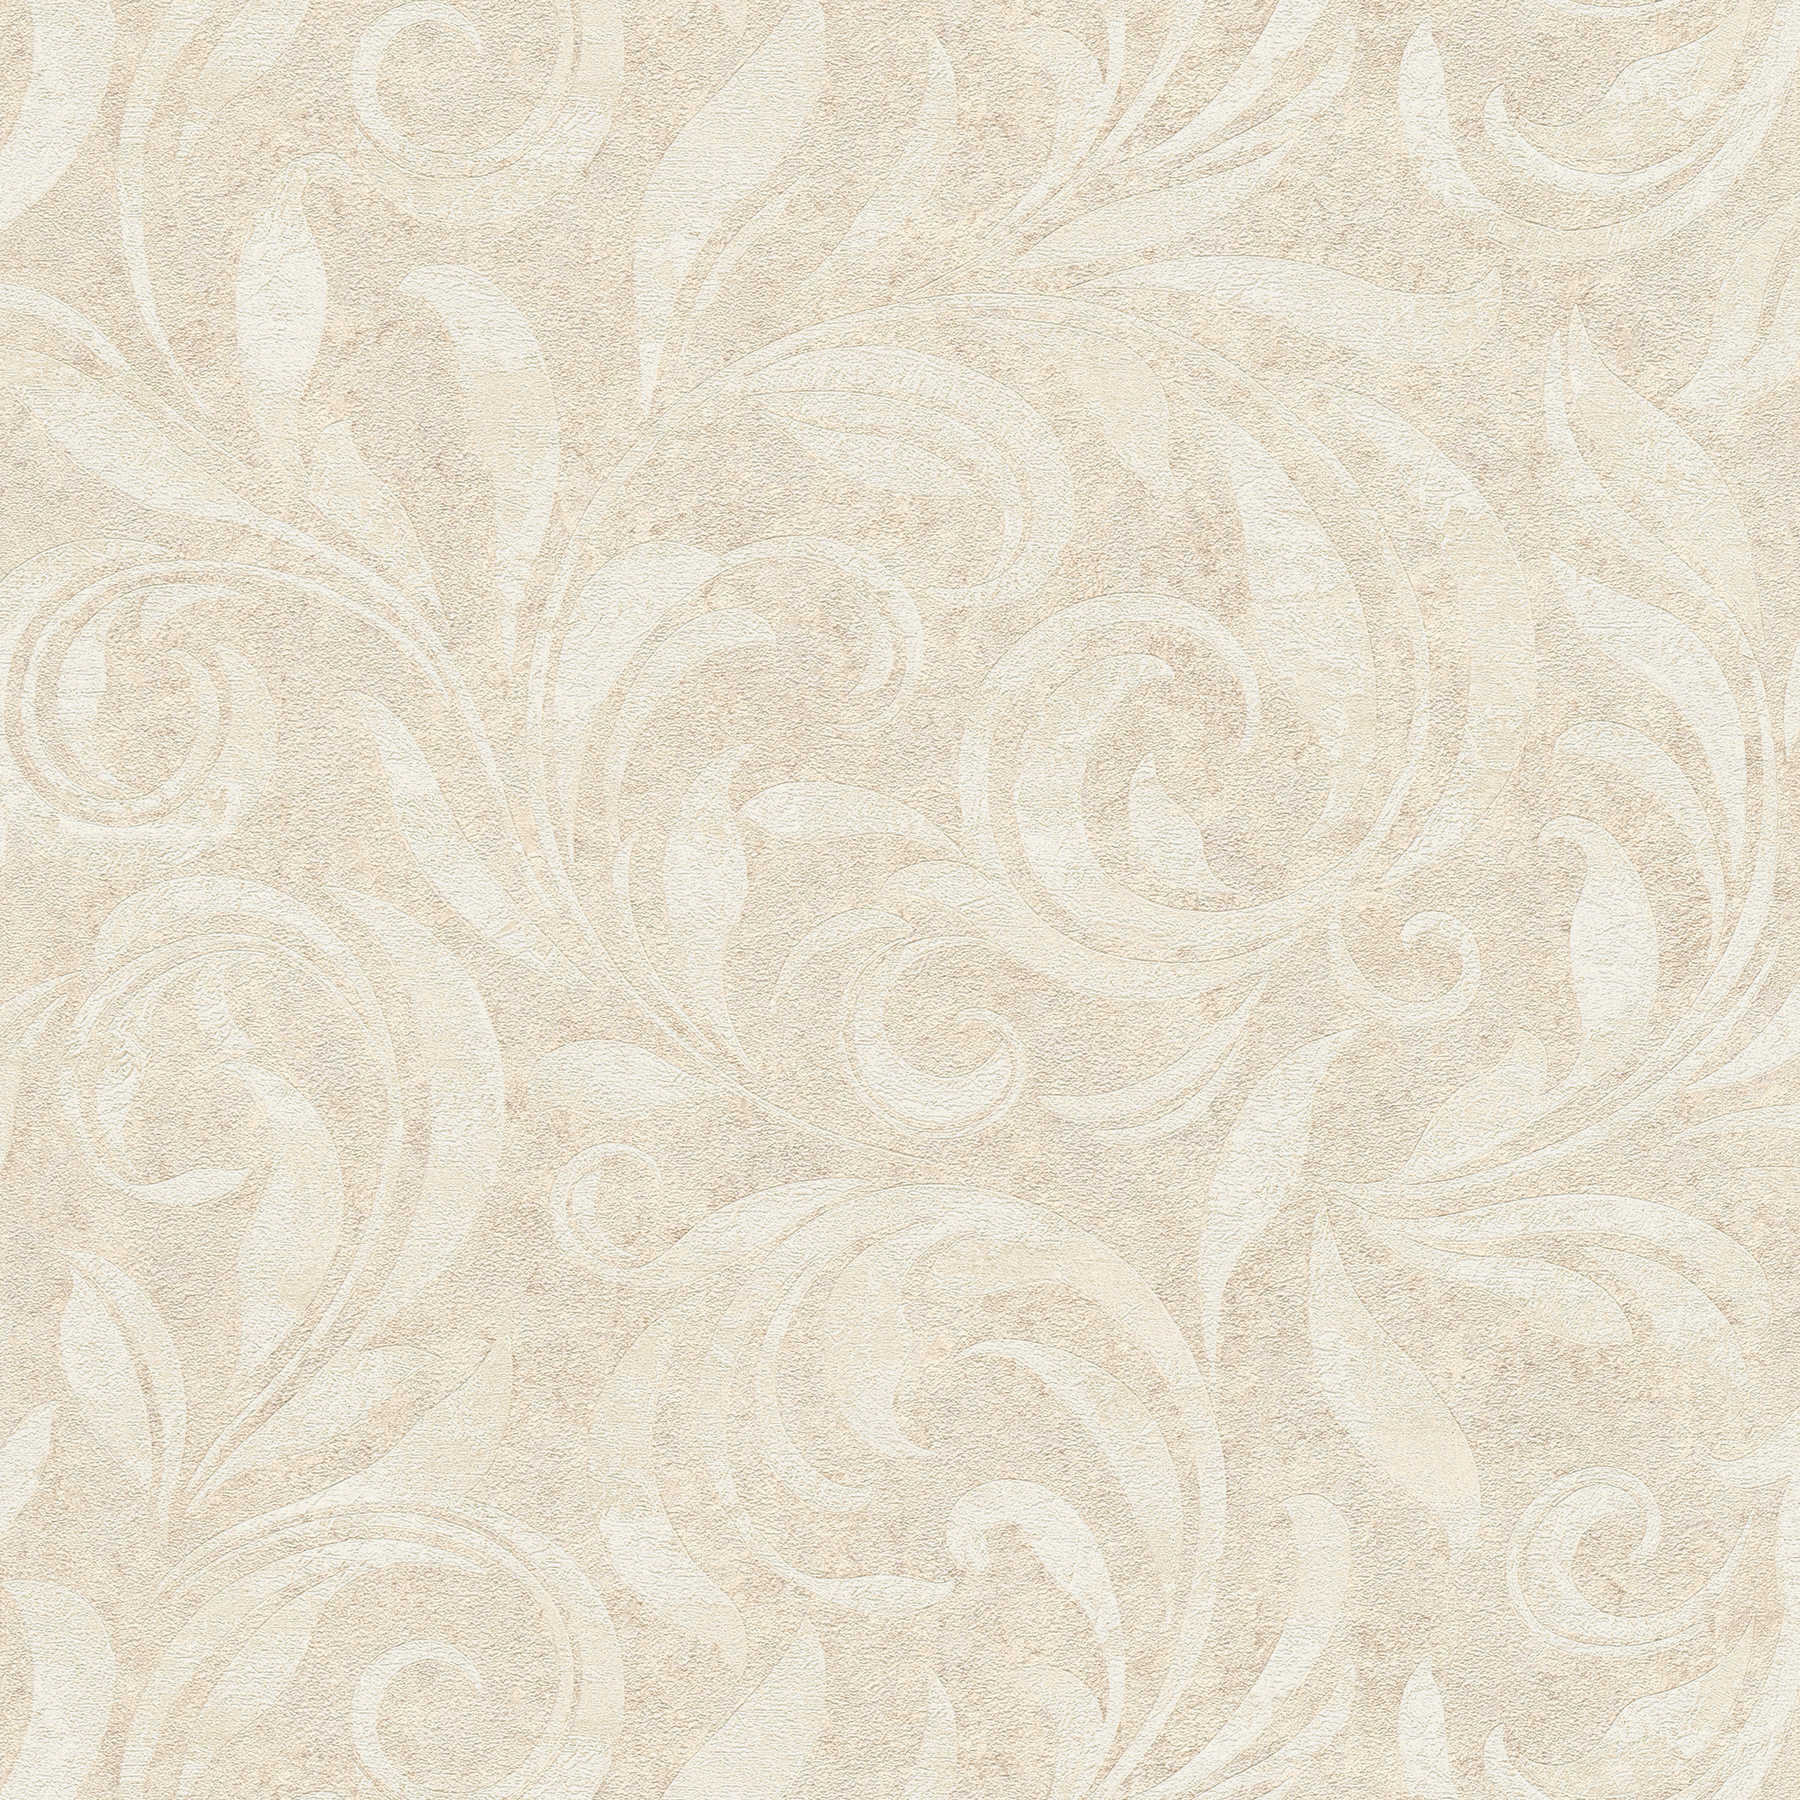         wallpaper tendrils pattern with structure & colour hatching - cream, metallic
    